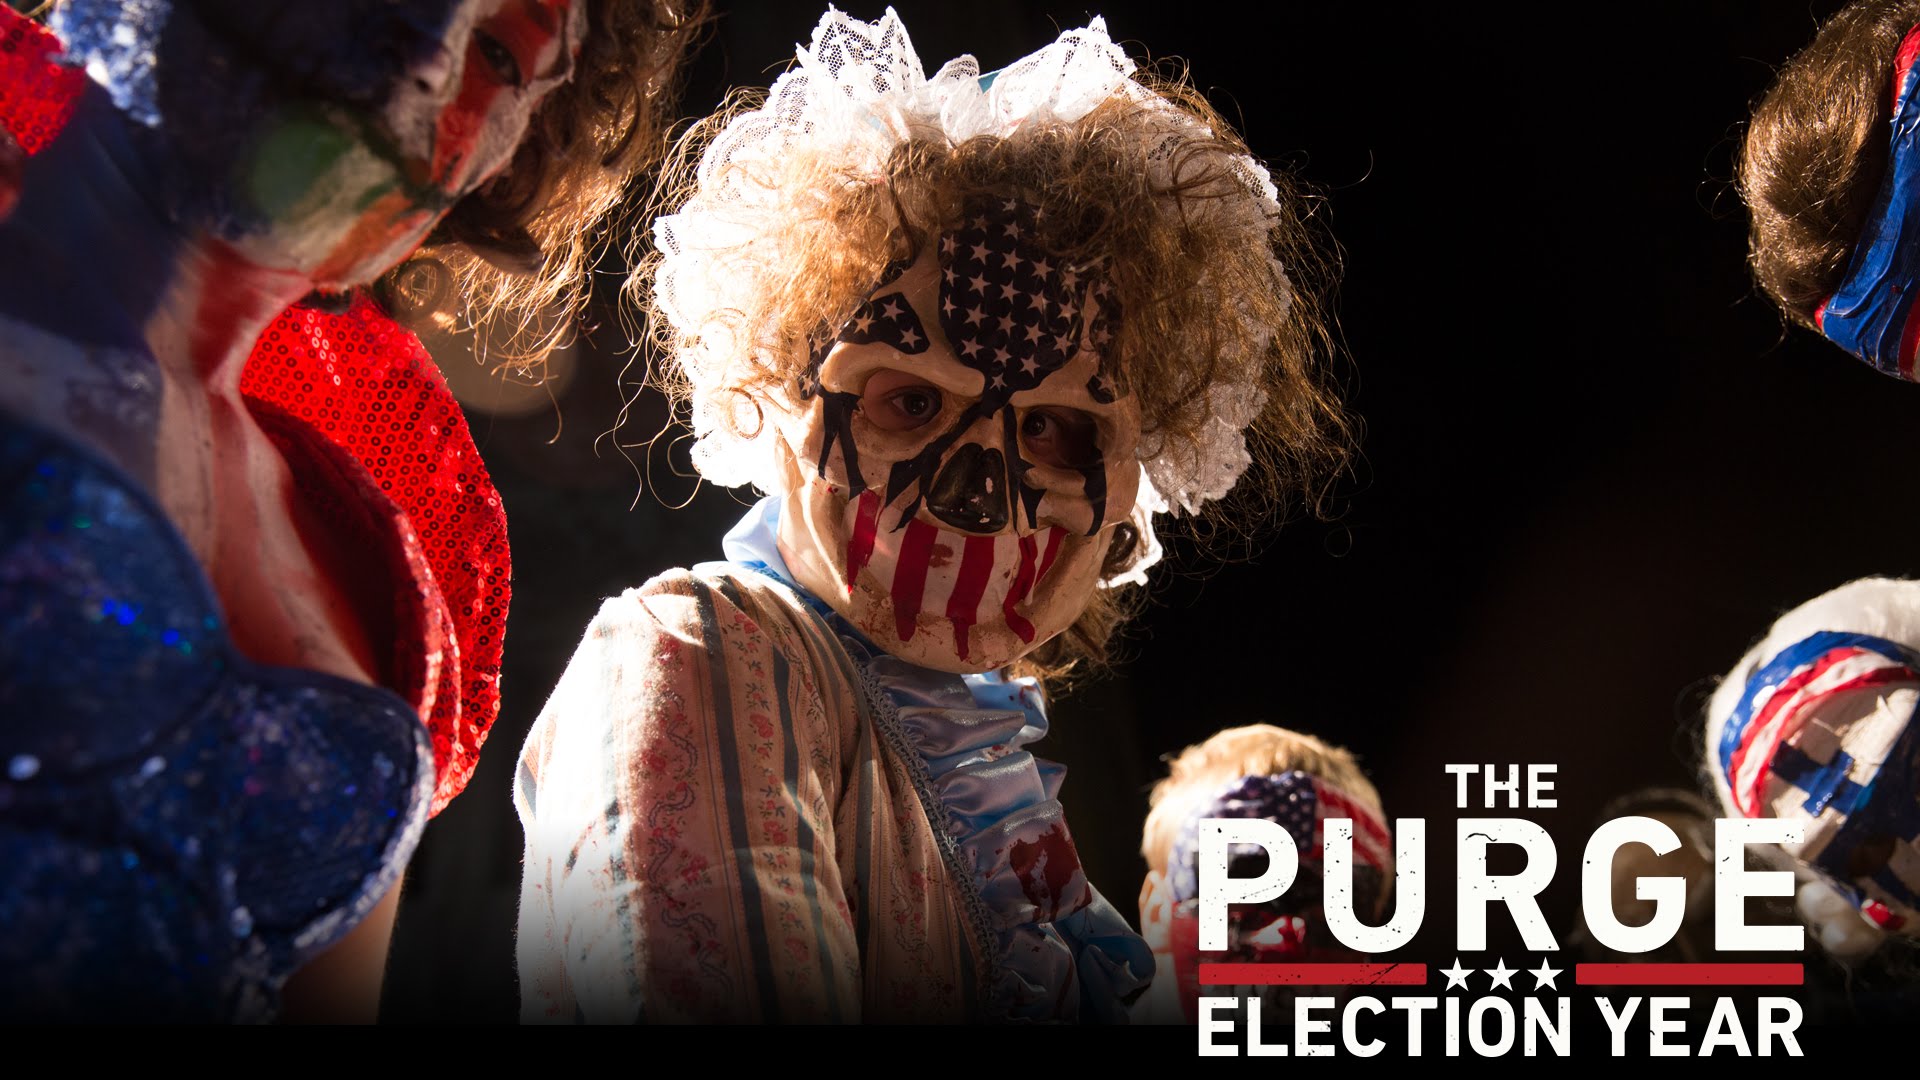 The purge election year hd movies k wallpapers images backgrounds photos and pictures